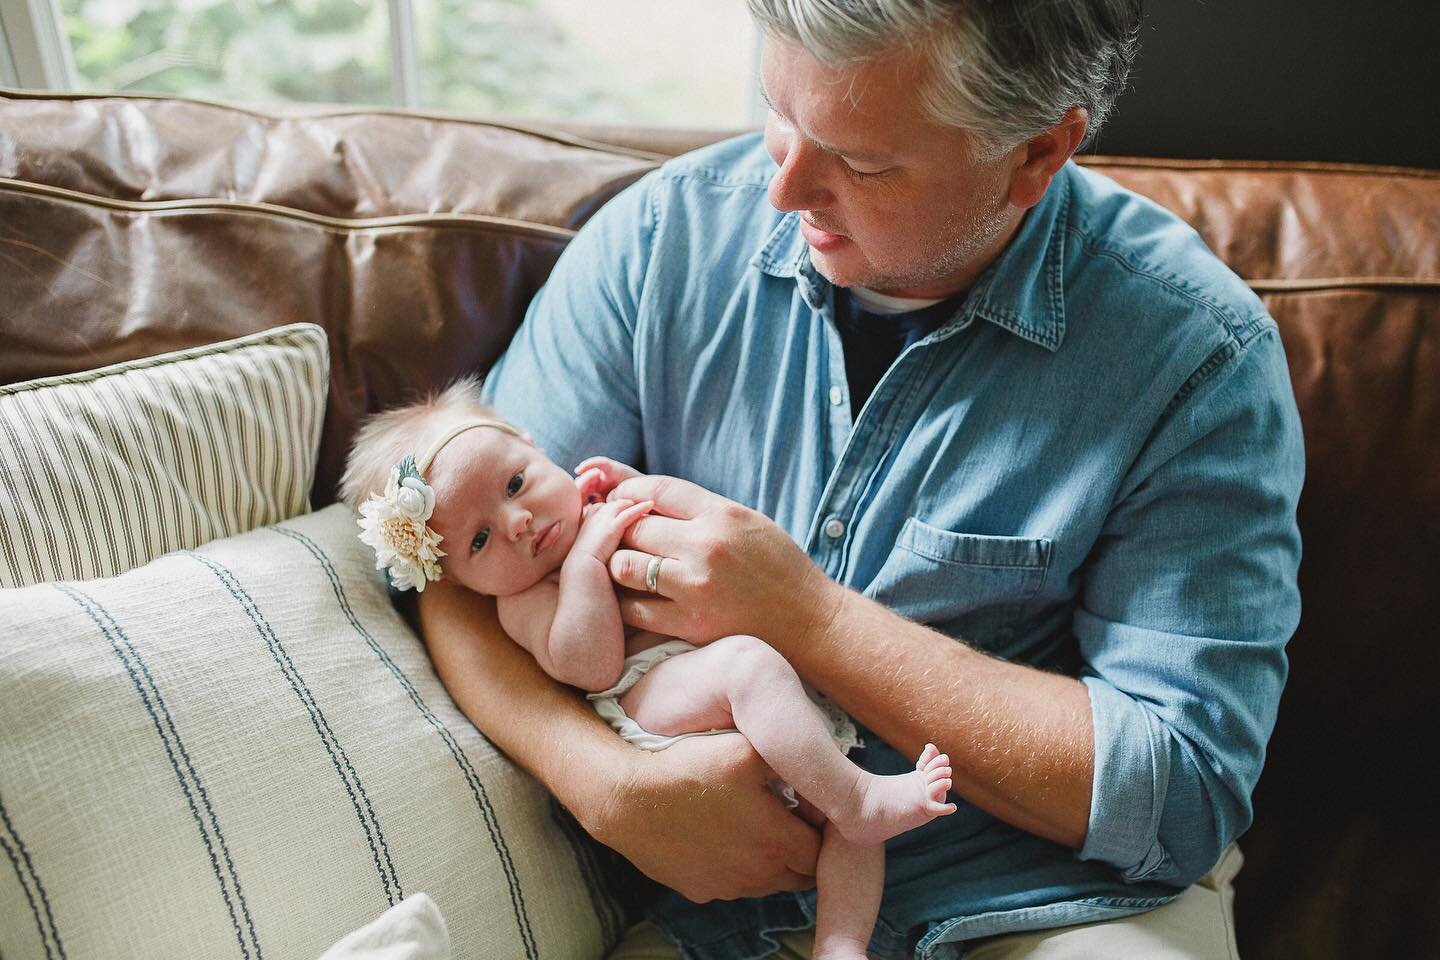 Wide-eyed + peaceful with Daddy! 💘
.
.
.
.
#andreawardenphotography #philadelphianewbornphotographer #mainlinenewbornphotographer #newbornphotography #newbornphotographer #chestercountynewbornphotographer #montconewbornphotographer #buckscountynewbo